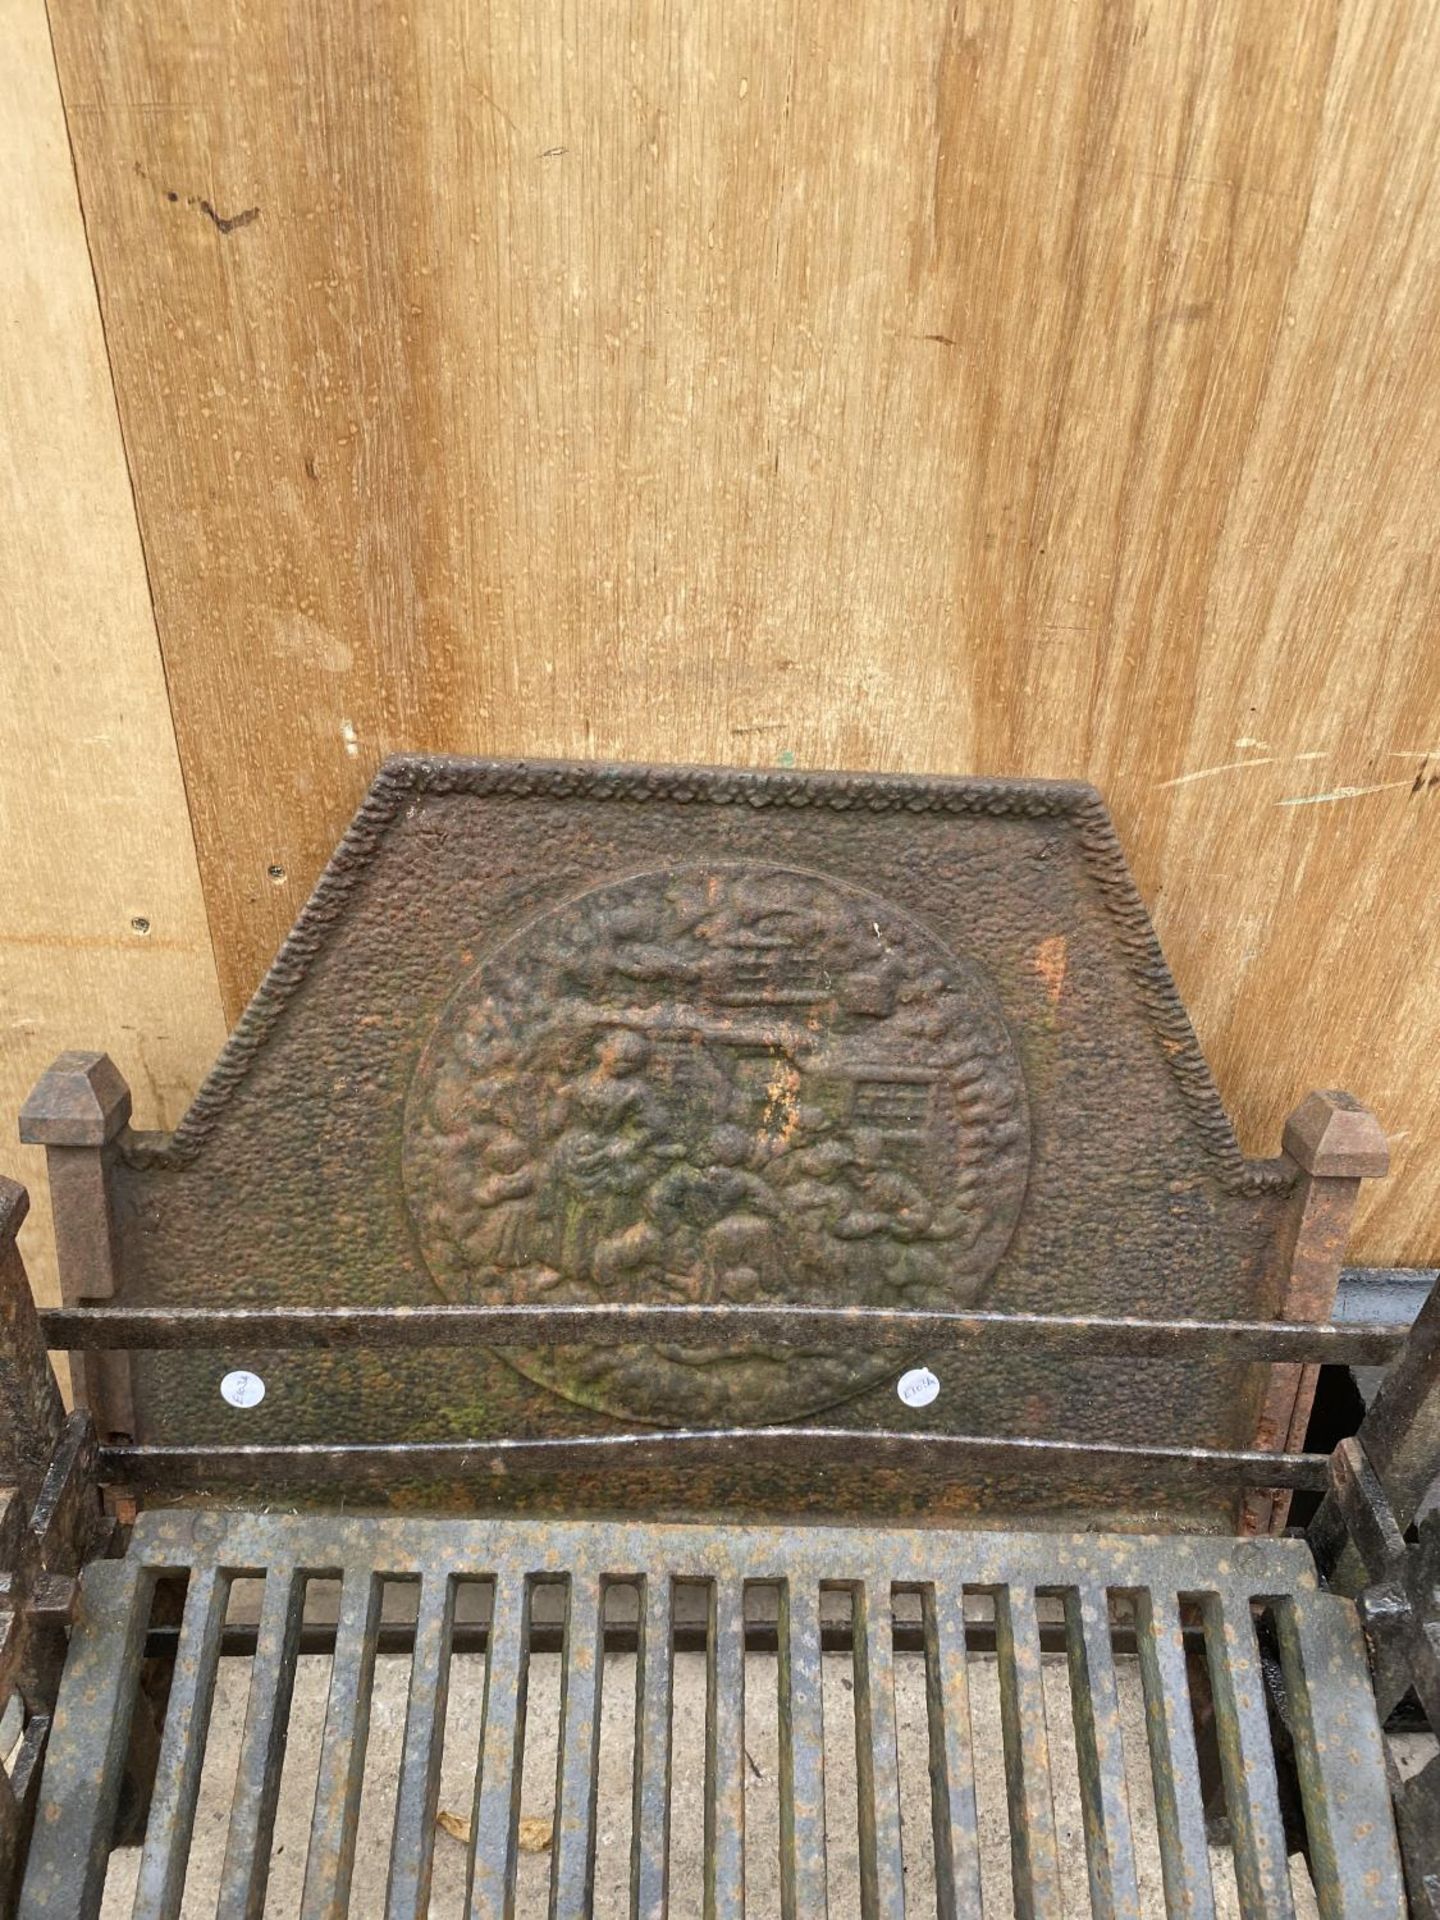 TWO VINTAGE CAST IRON GUTTER HOPPERS AND A CAST IRON FIRE GRATE - Image 6 of 8